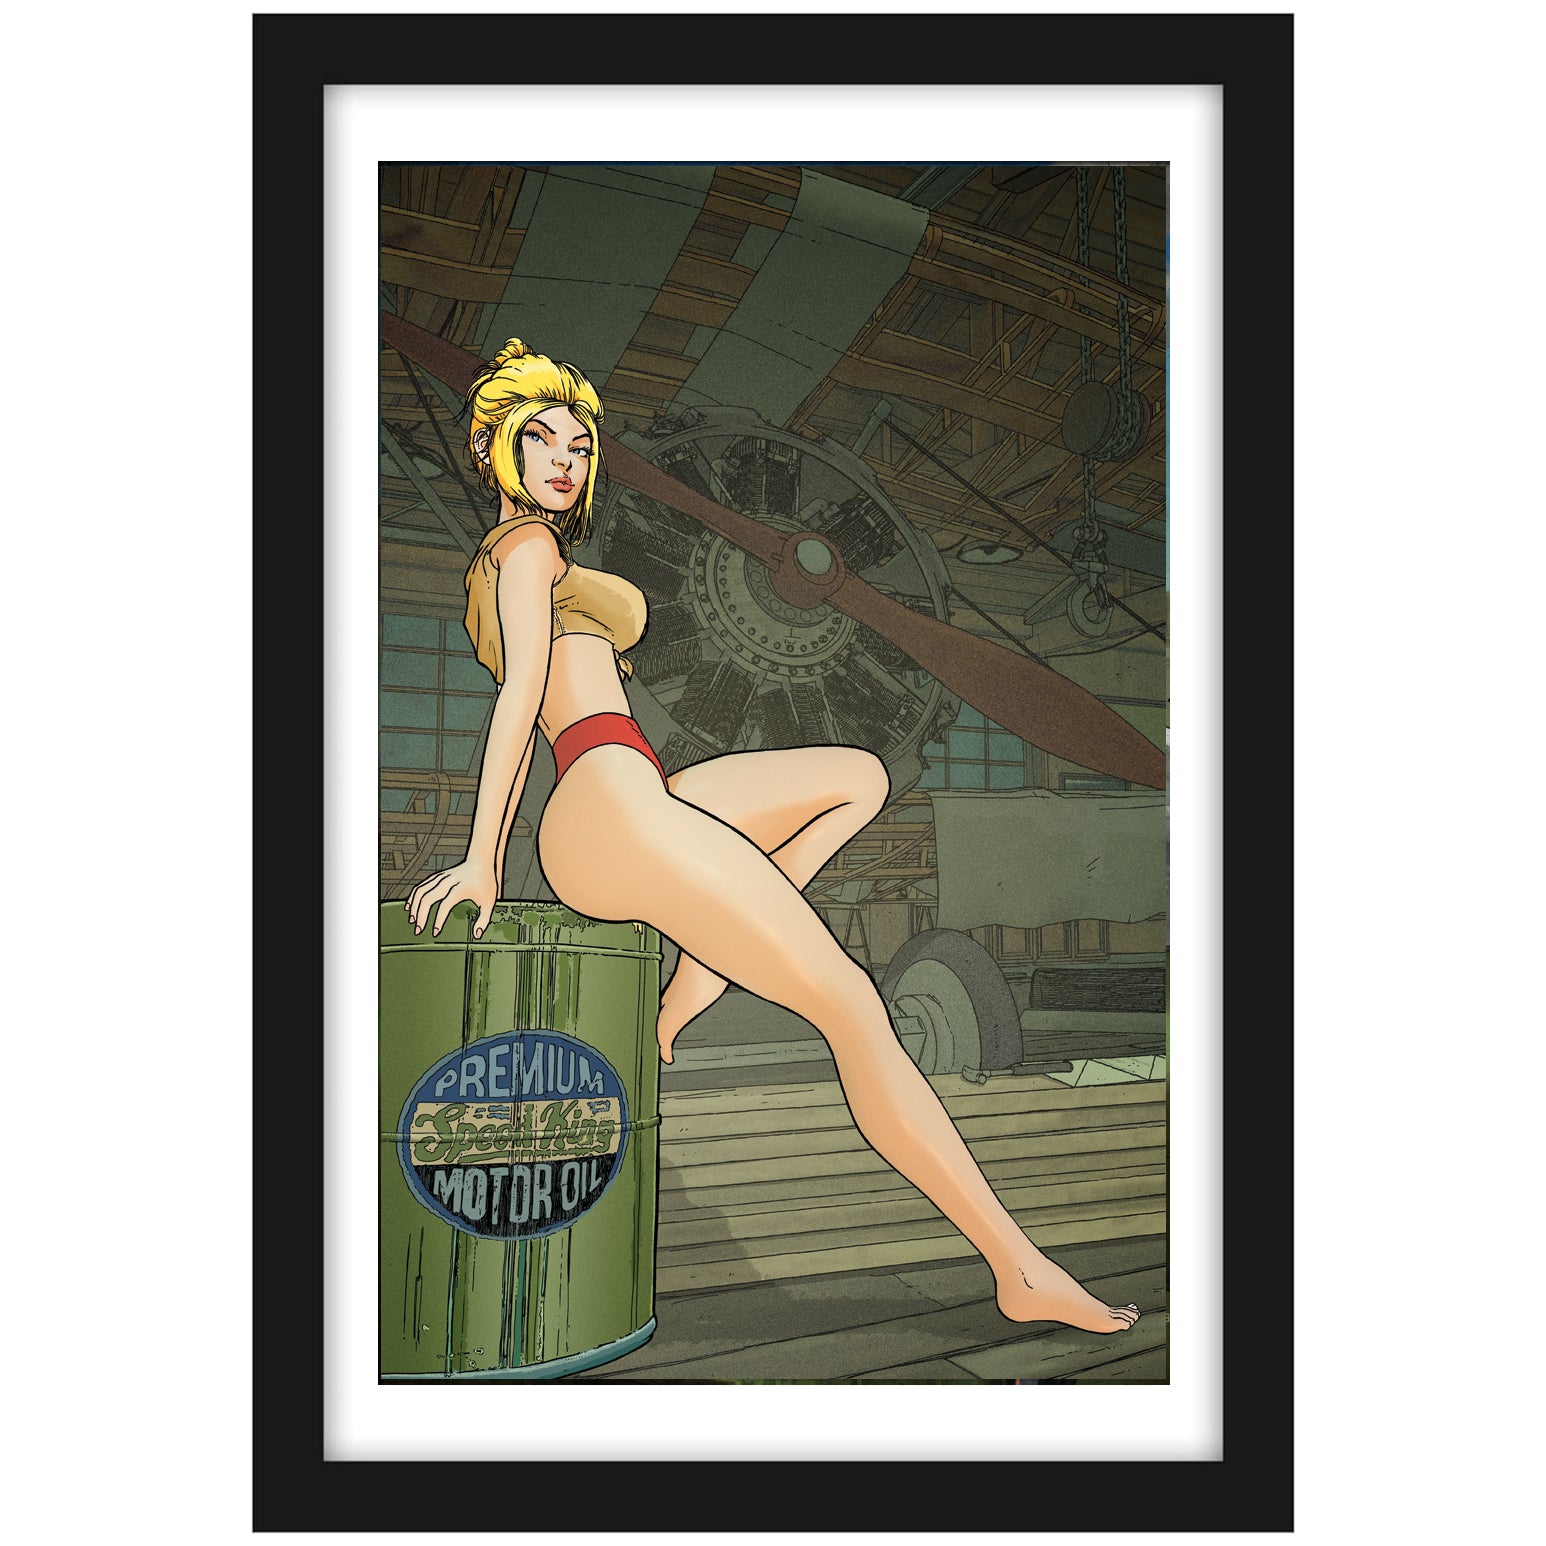 Speed King Hangar Art - Vintage Print Pinup & Airplane Art by Diego Guerra - Limited Numbered Edition